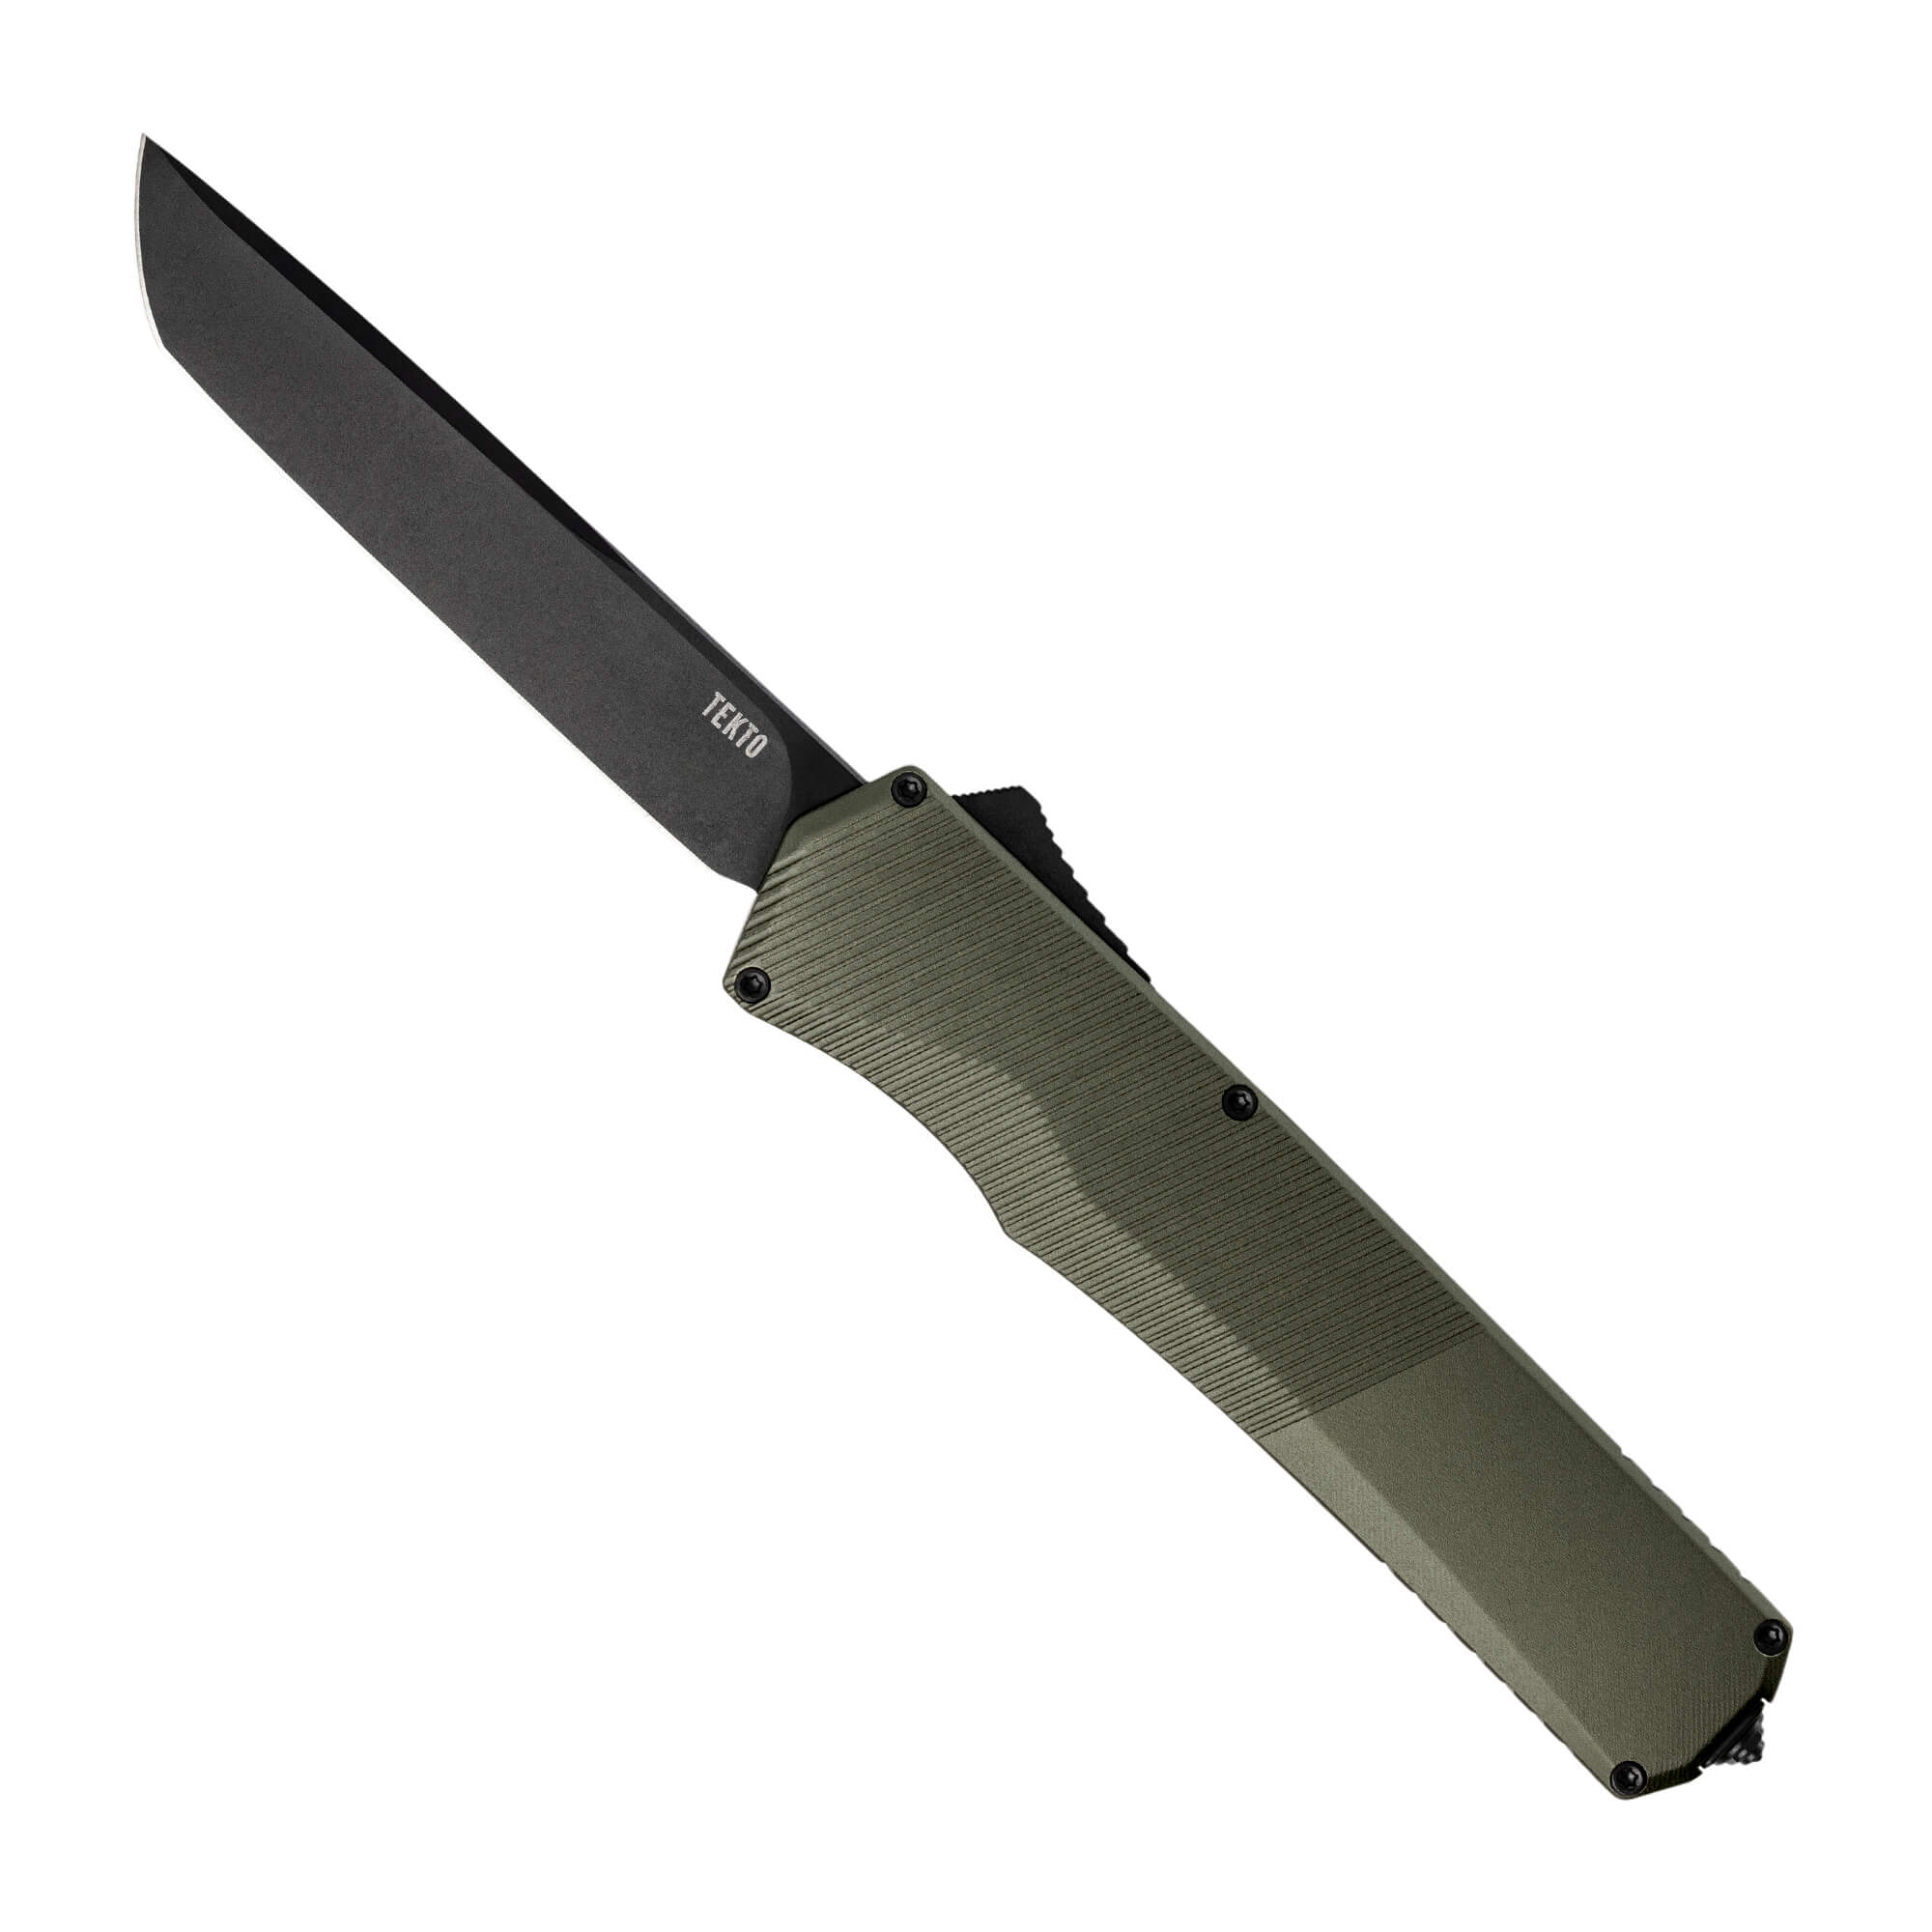 Tekto Knives A5 Spry - Automatic - OD Green Aluminum - Black CPM-S35VN Tanto Blade